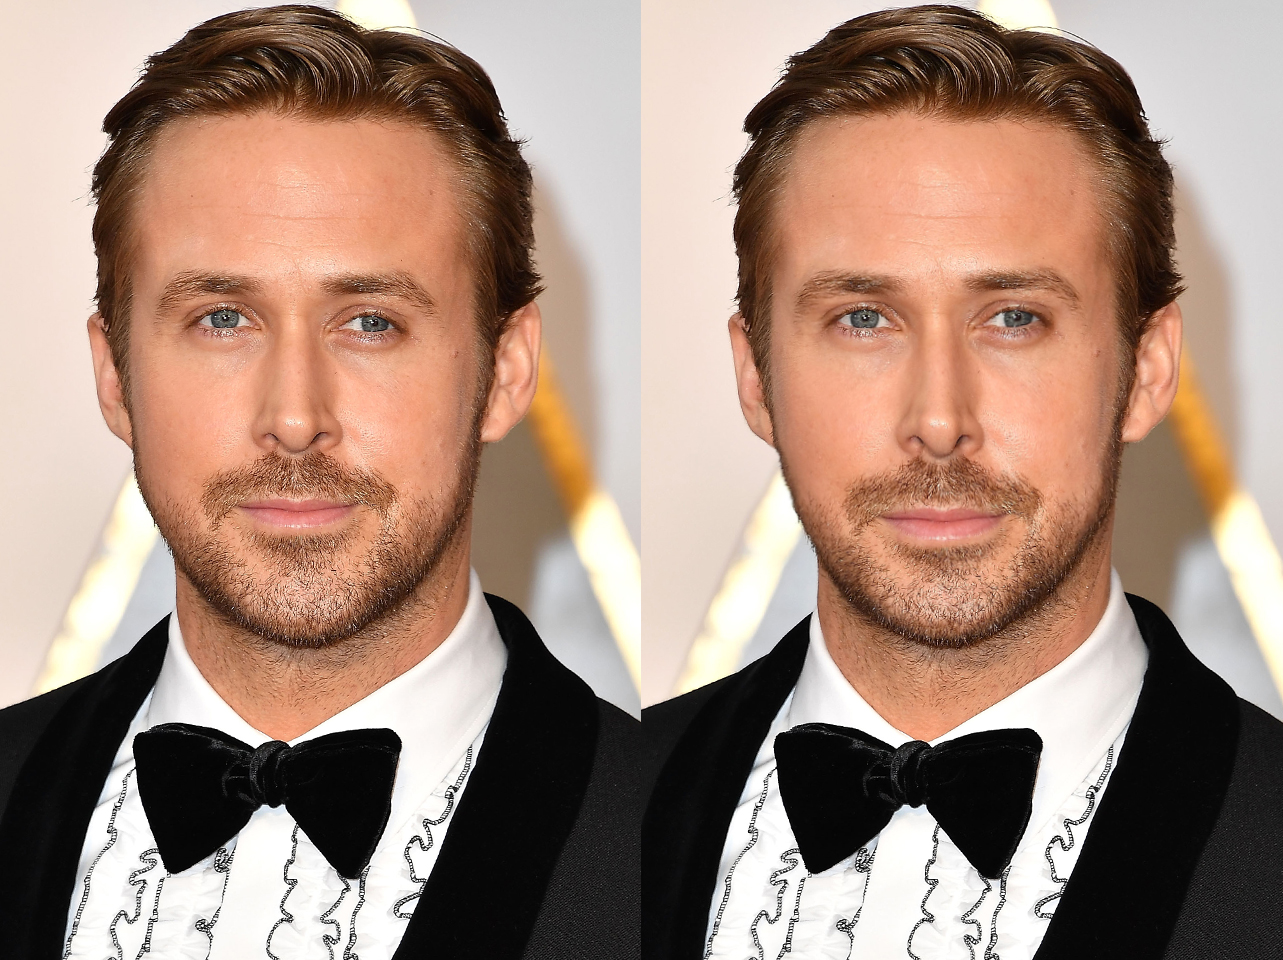 The real Ryan Gosling vs Ideal self | Source: Getty Images